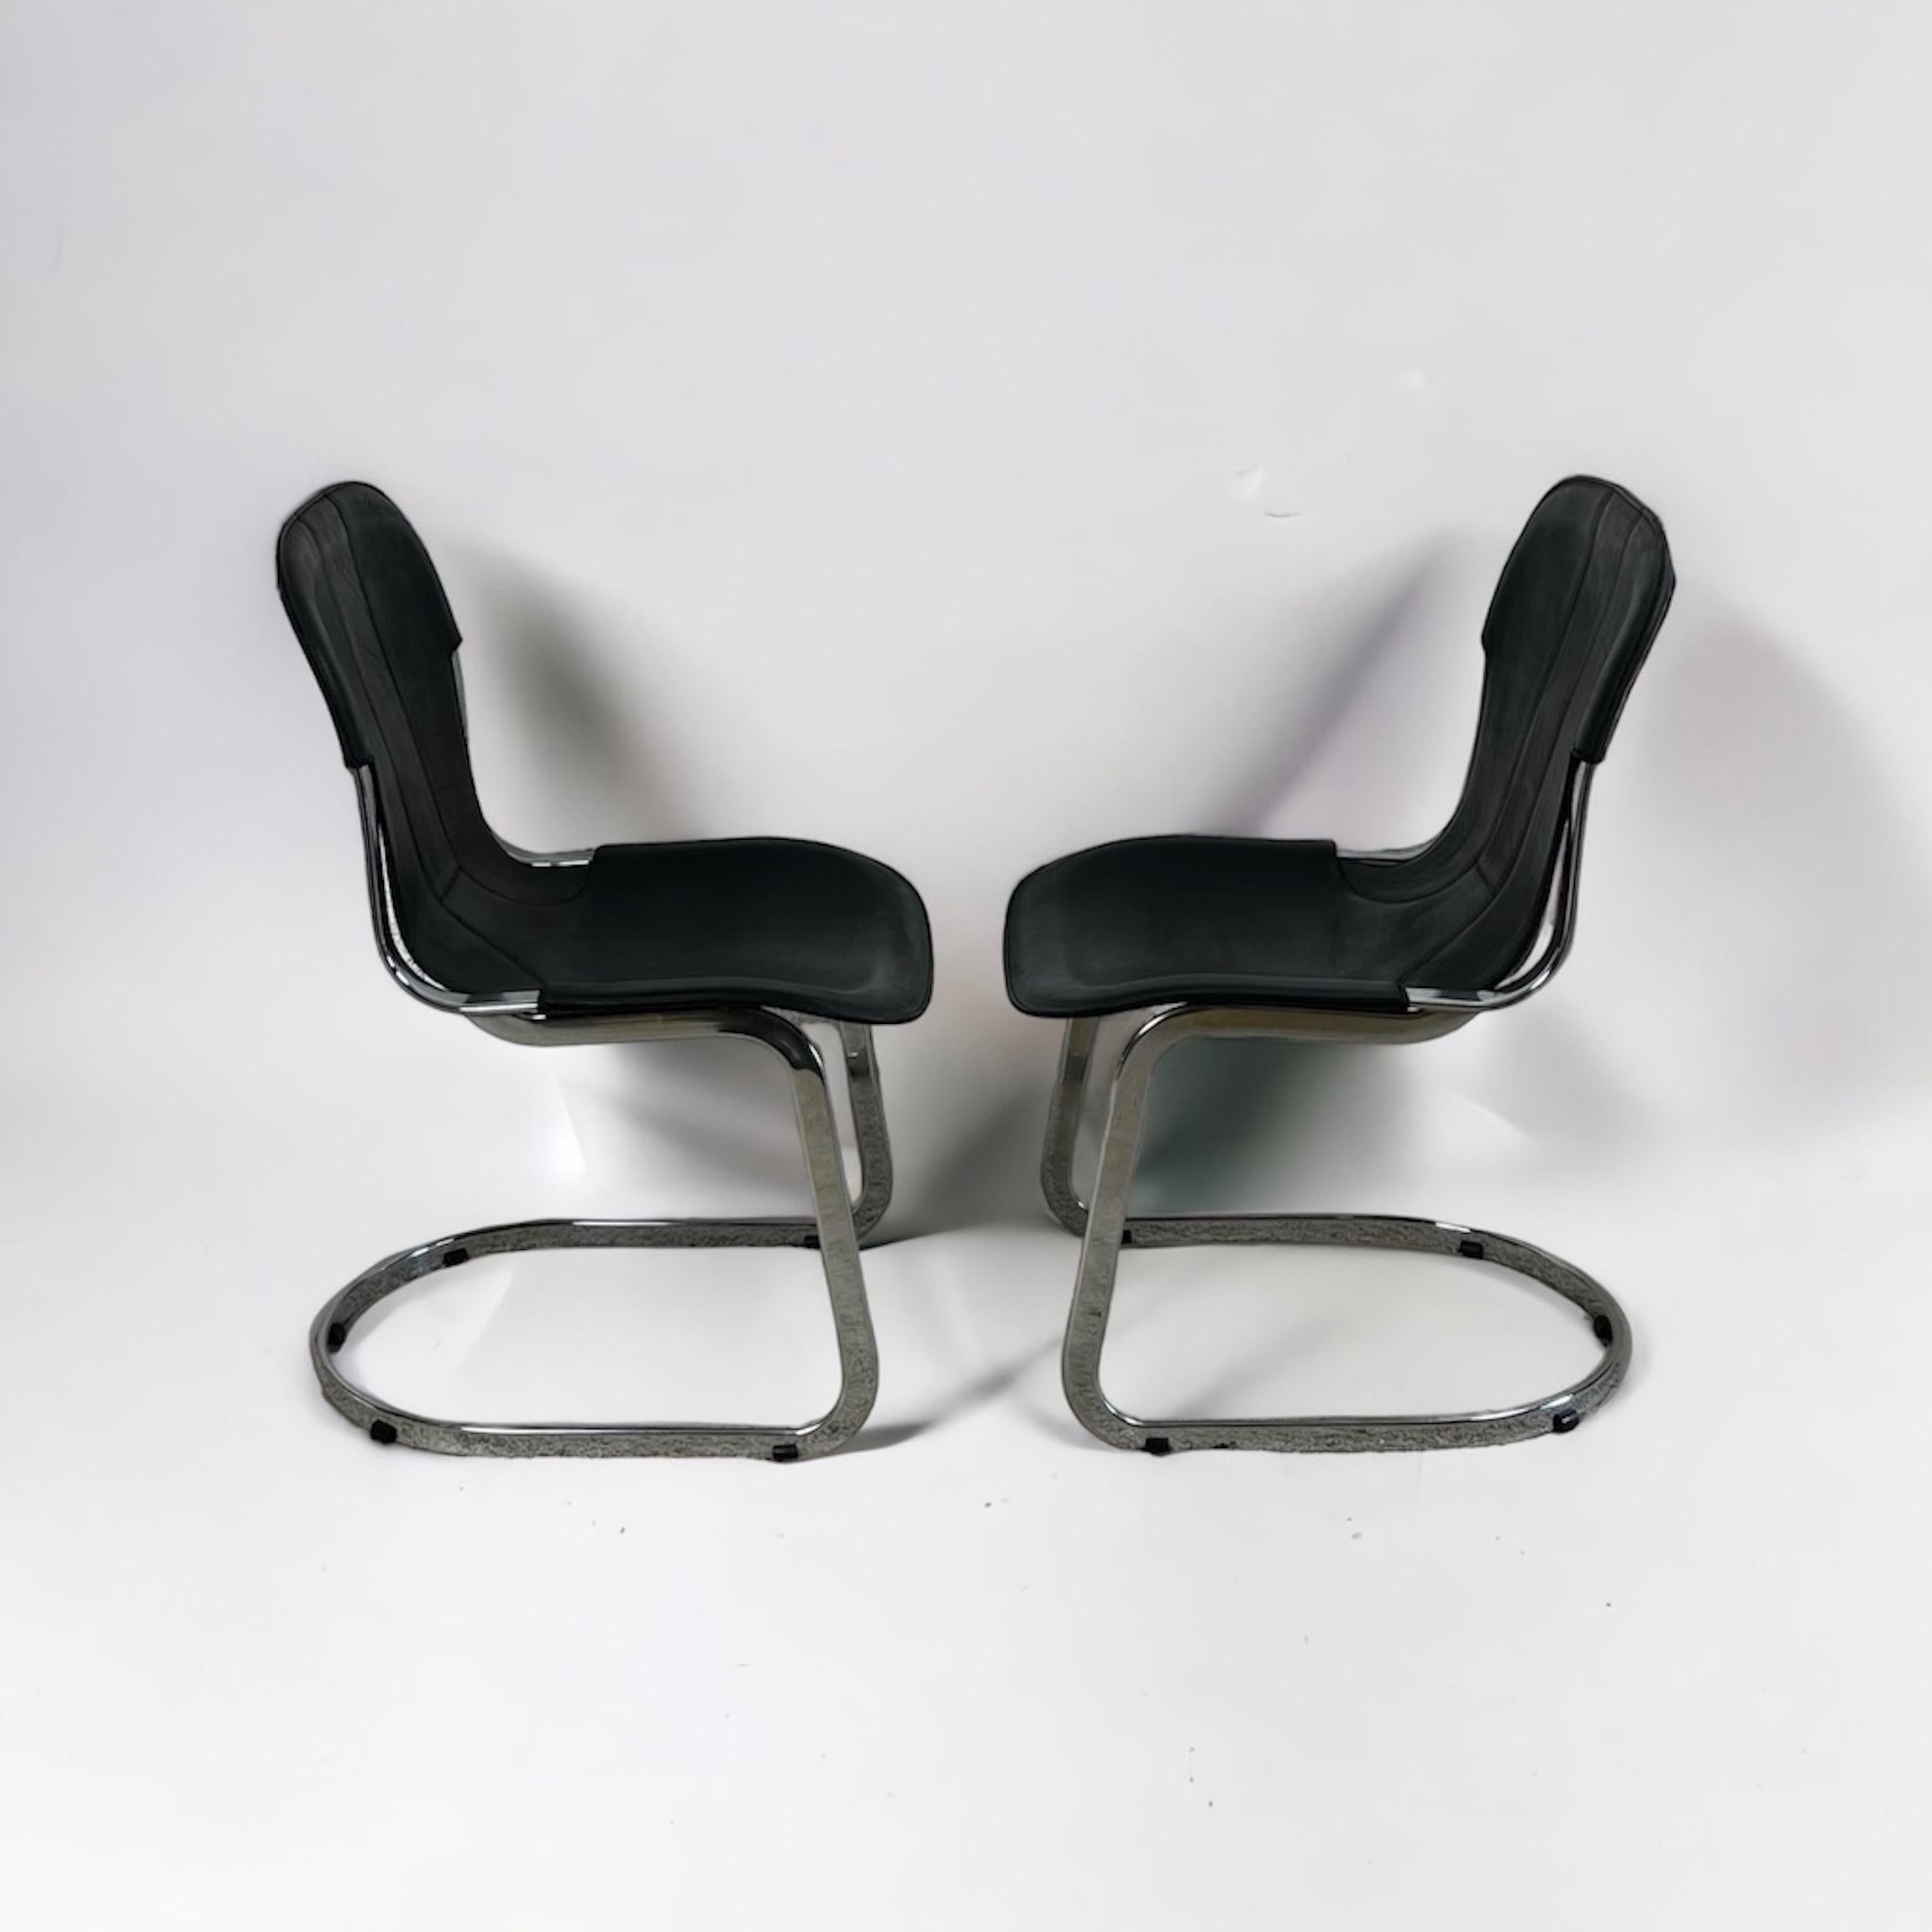 Iconic and rare leather and steel chairs designed by Willy Rizzo and produced by Cidue in the 70s.

These luxury chairs represents an icon of mid-century modern design. Crafted with exquisite attention to detail, these chairs seamlessly blend